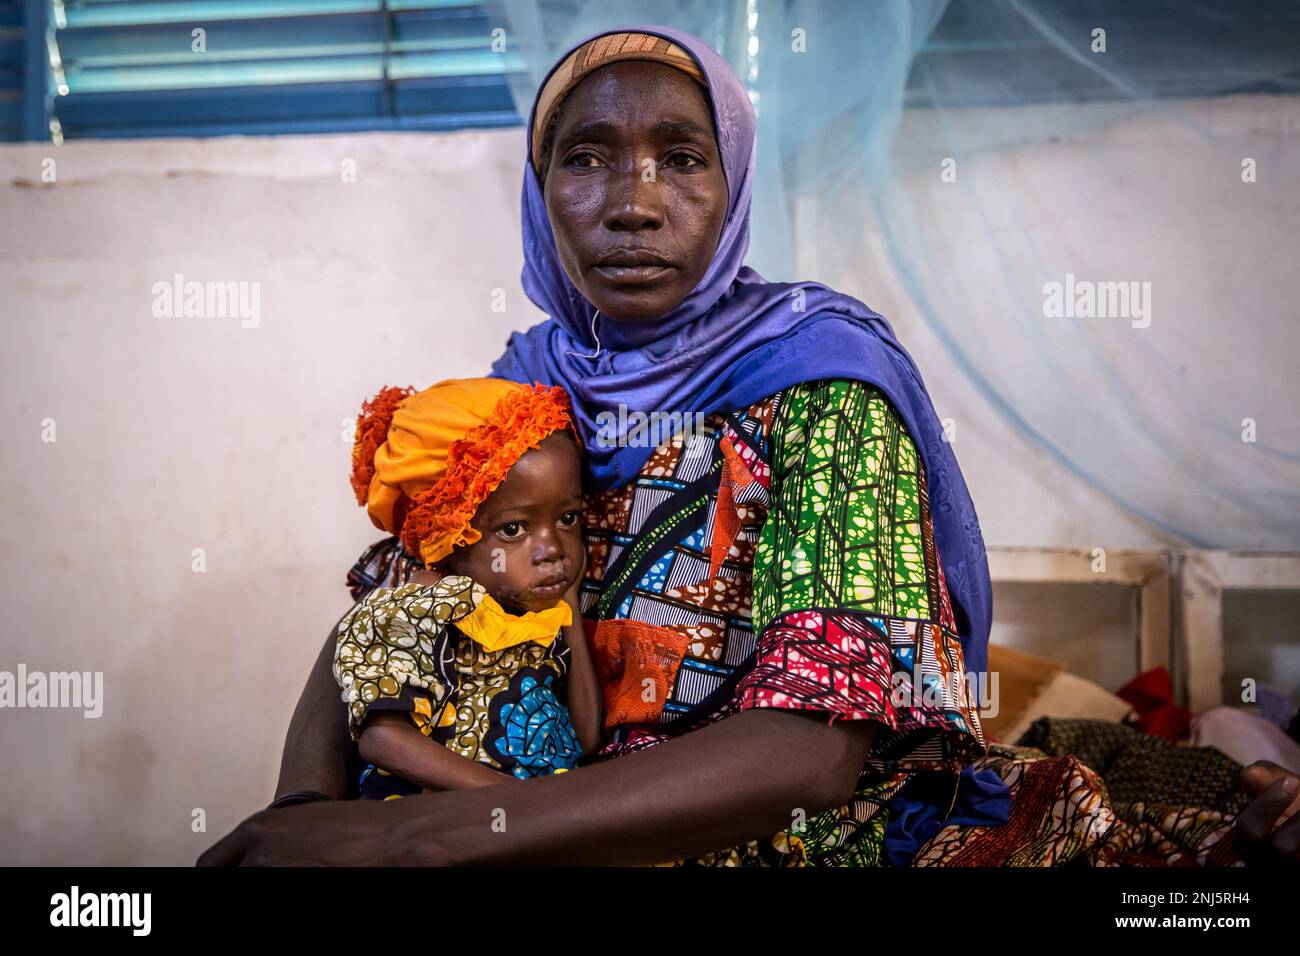 Zouera Saidou is in hospital with her granddaughter, 2-year-old weighing 6.4kg - half the average weight of a child her age, also suffering from malnutrition. Malnutrition is a recurring crisis in Niger, a landlocked West African country, where climate change, conflict and a fast growing population are all increasing the challenges when it comes to getting enough food. In 2022, 4.4 million Nigeriens were said to be in need of urgent humanitarian assistance. (Photo by Sally Hayden / SOPA Images/Sipa USA) Stock Photo